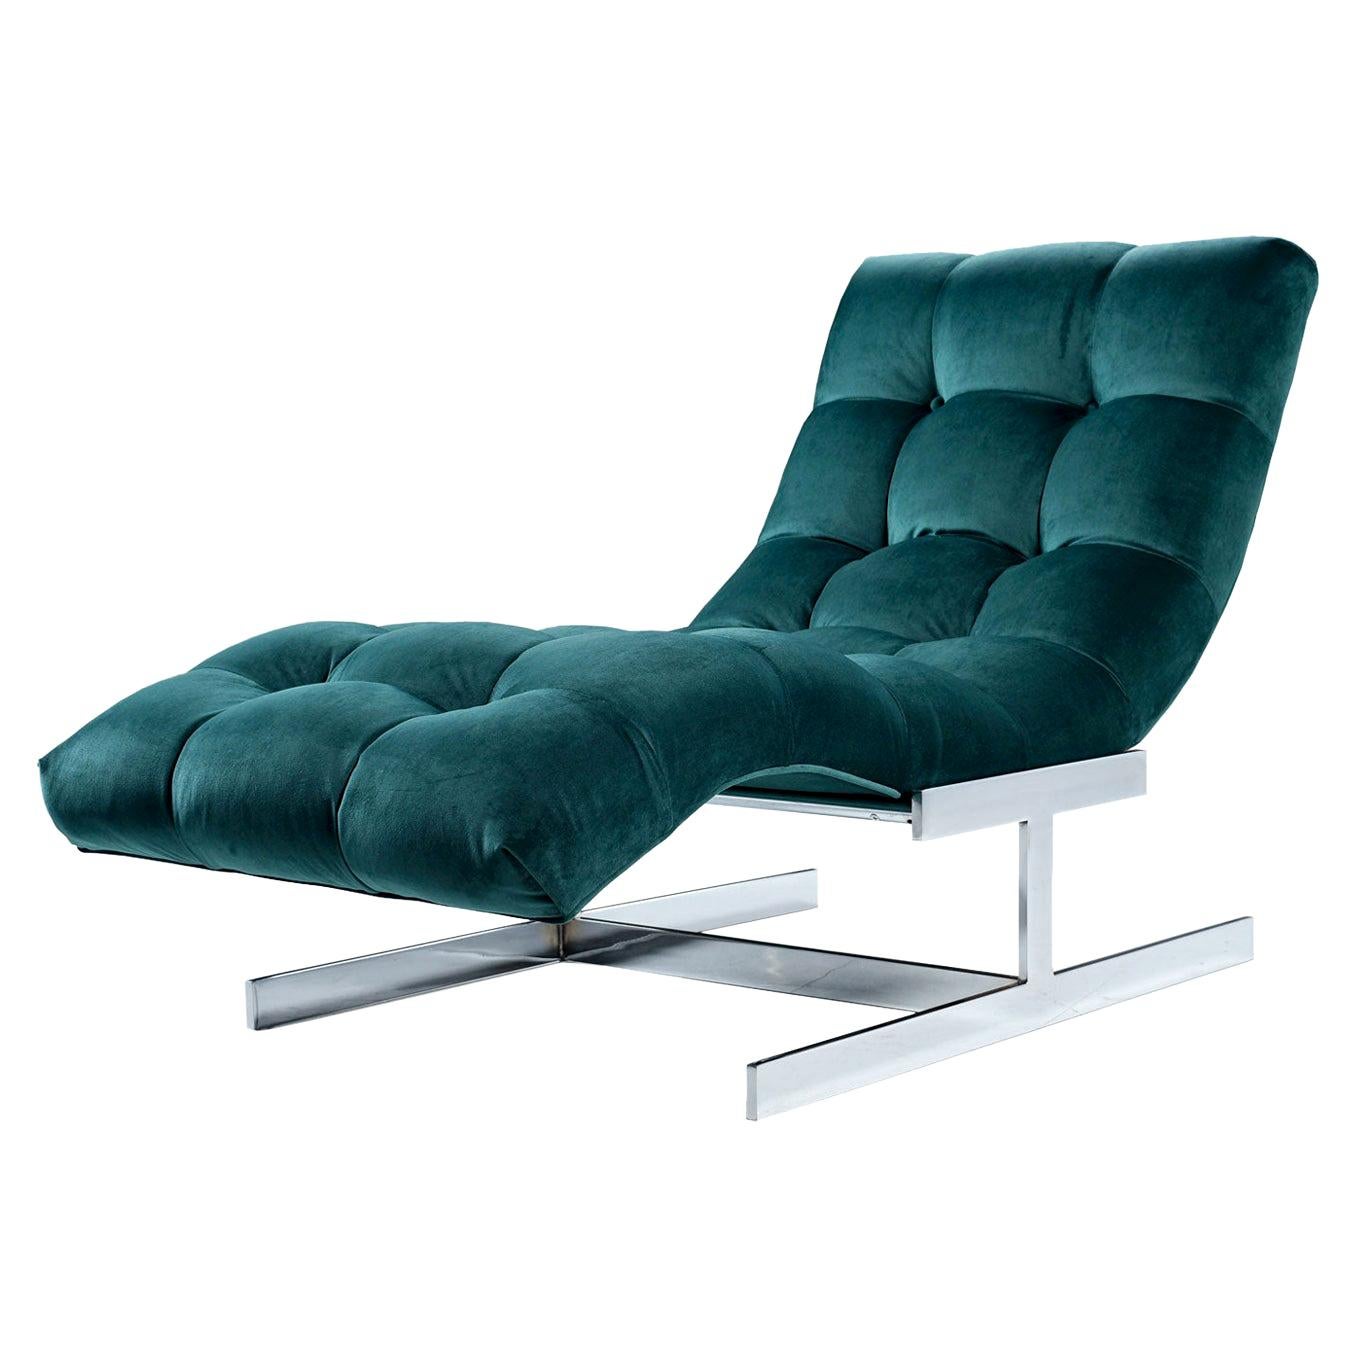 New Forest Green Velvet Milo Baughman Style Wave Chaise Lounge by Carsons